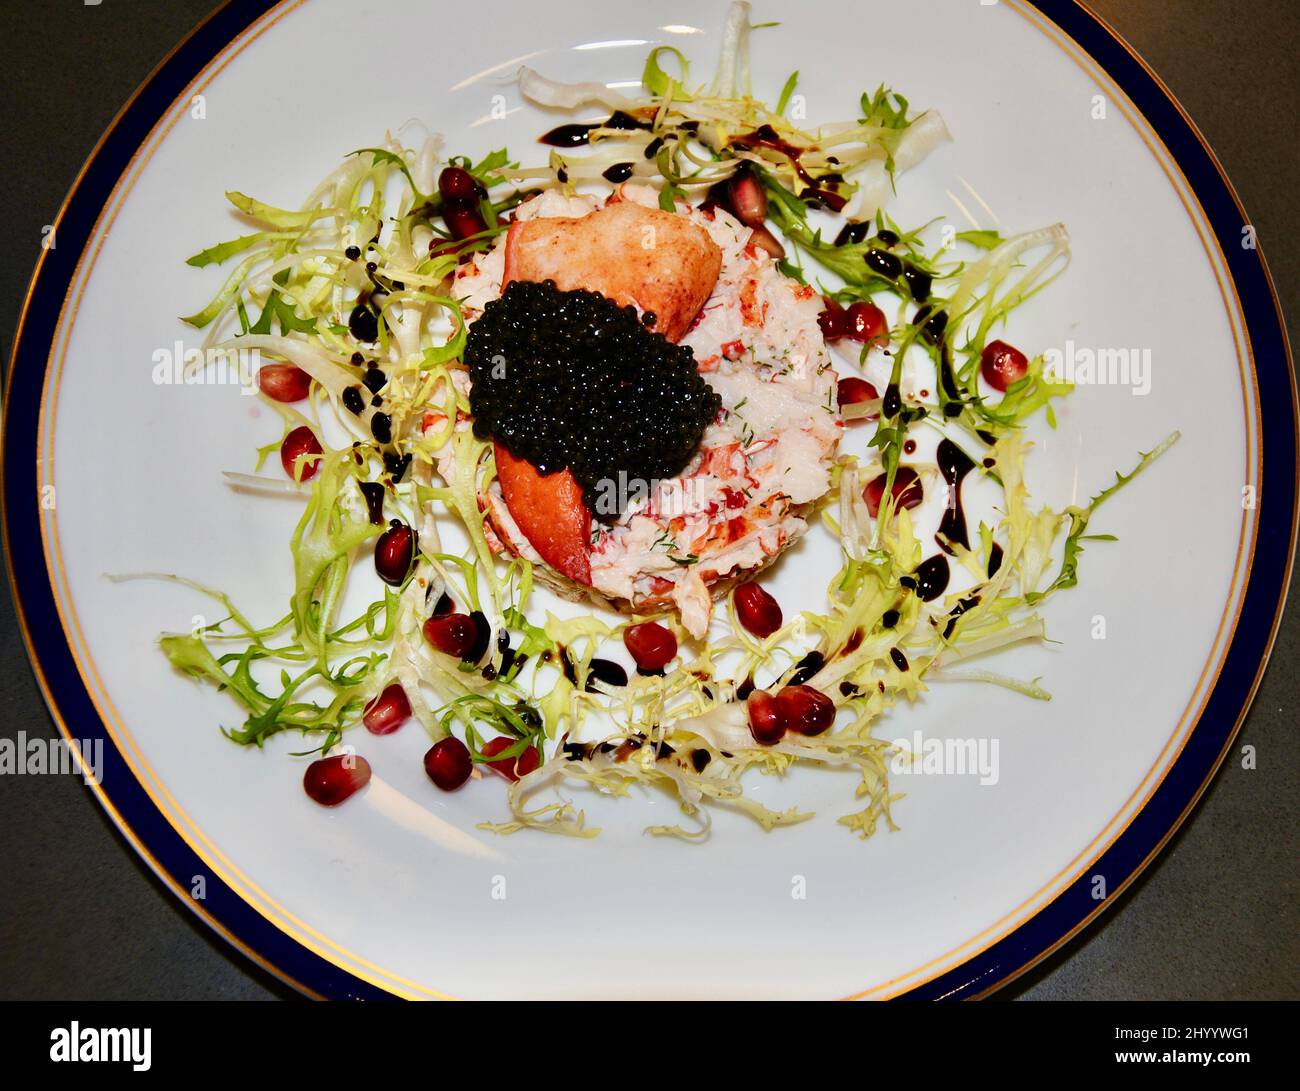 Lobster salad topped with American paddlefish caviar on beautiful plate decorated with frisée salad, pomegranate seeds and balsamic dressing Stock Photo